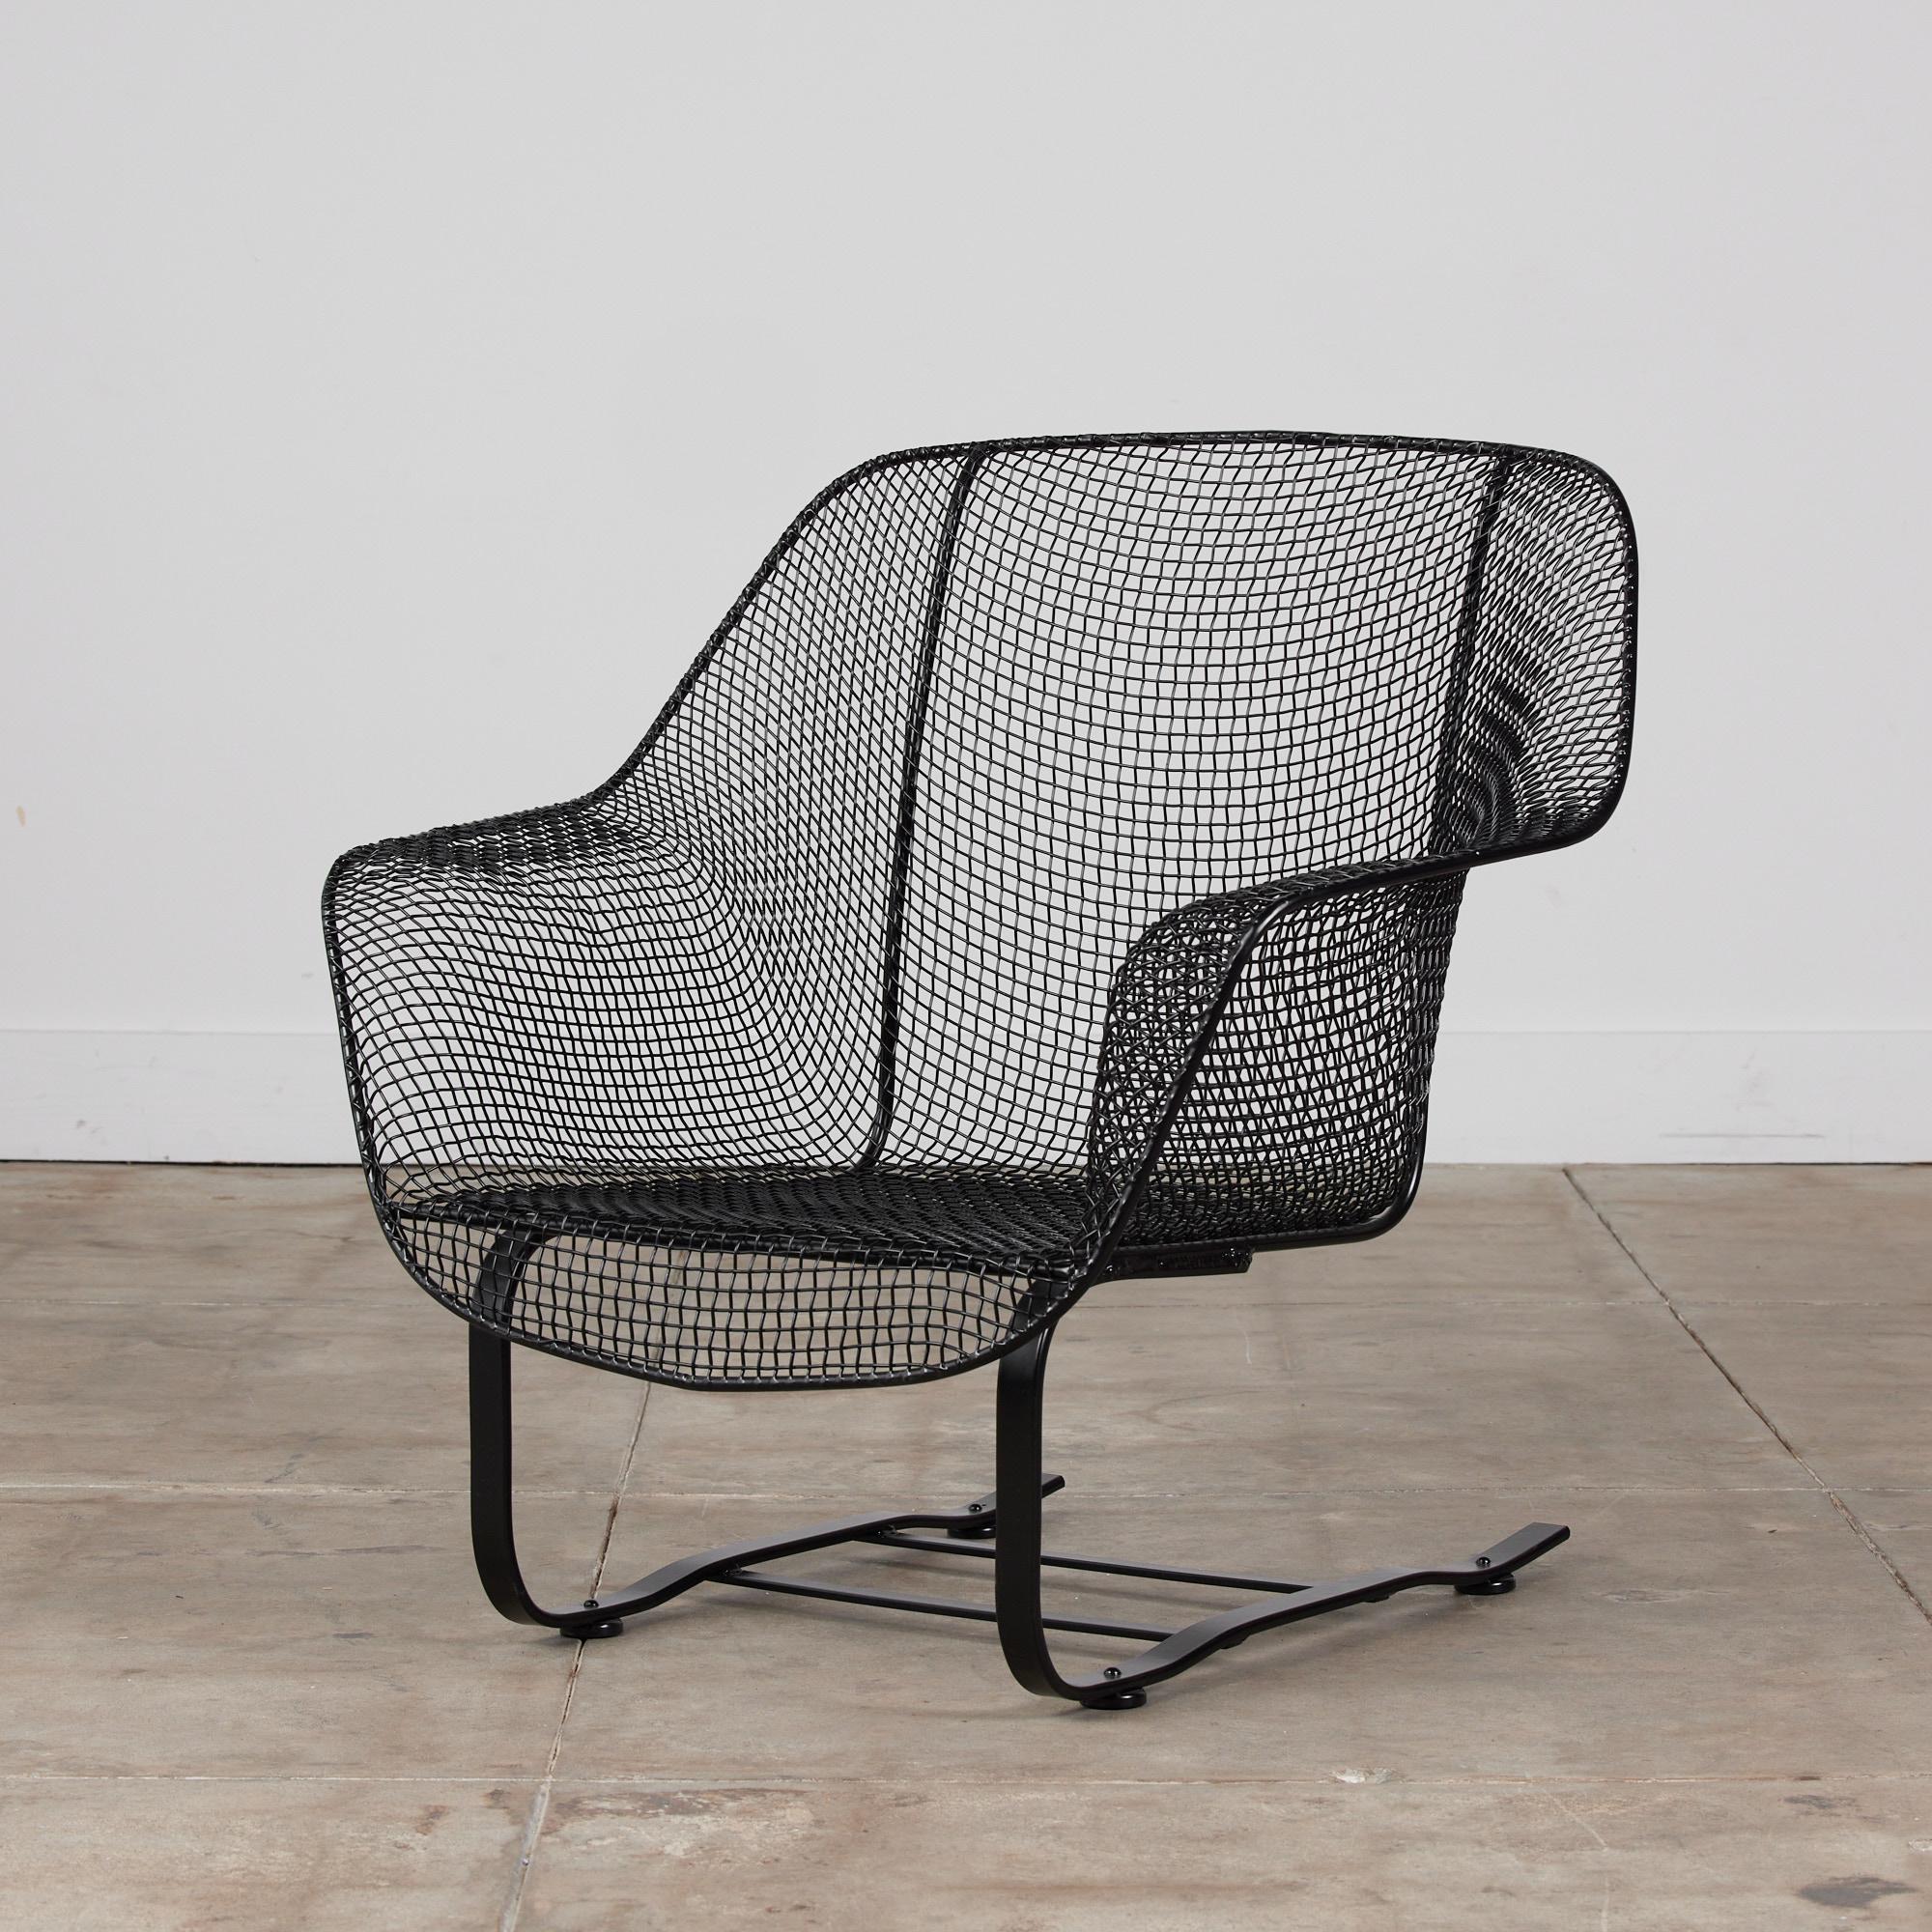 Outdoor rocking chair by Russell Woodard for Woodard Furniture, c.1950s. The rocking chair is from Woodard’s “Sculptura” line designed in 1956. The chair has a molded mesh frame that sits atop two wrought iron spring legs. The chair has been